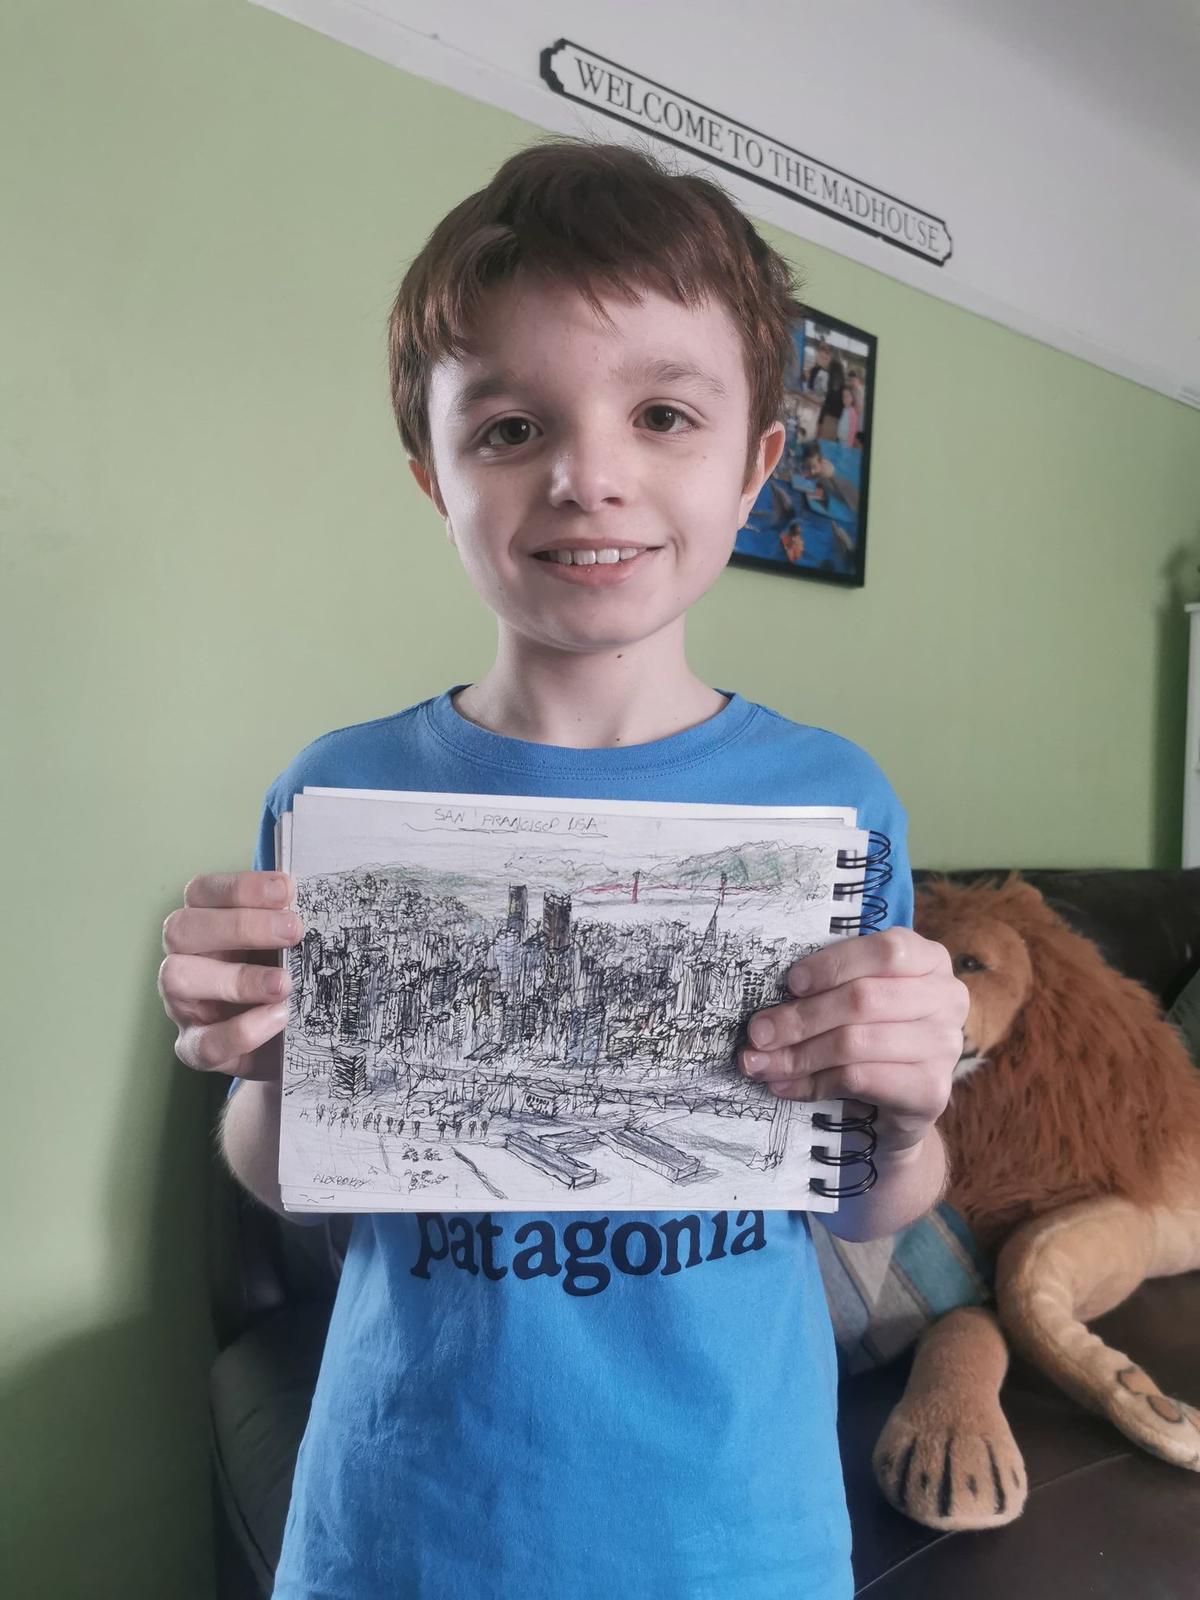  Alex with his latest picture of San Francisco (Courtesy of <a href="https://www.facebook.com/laura.jackson.9210">Laura Jackson</a>)